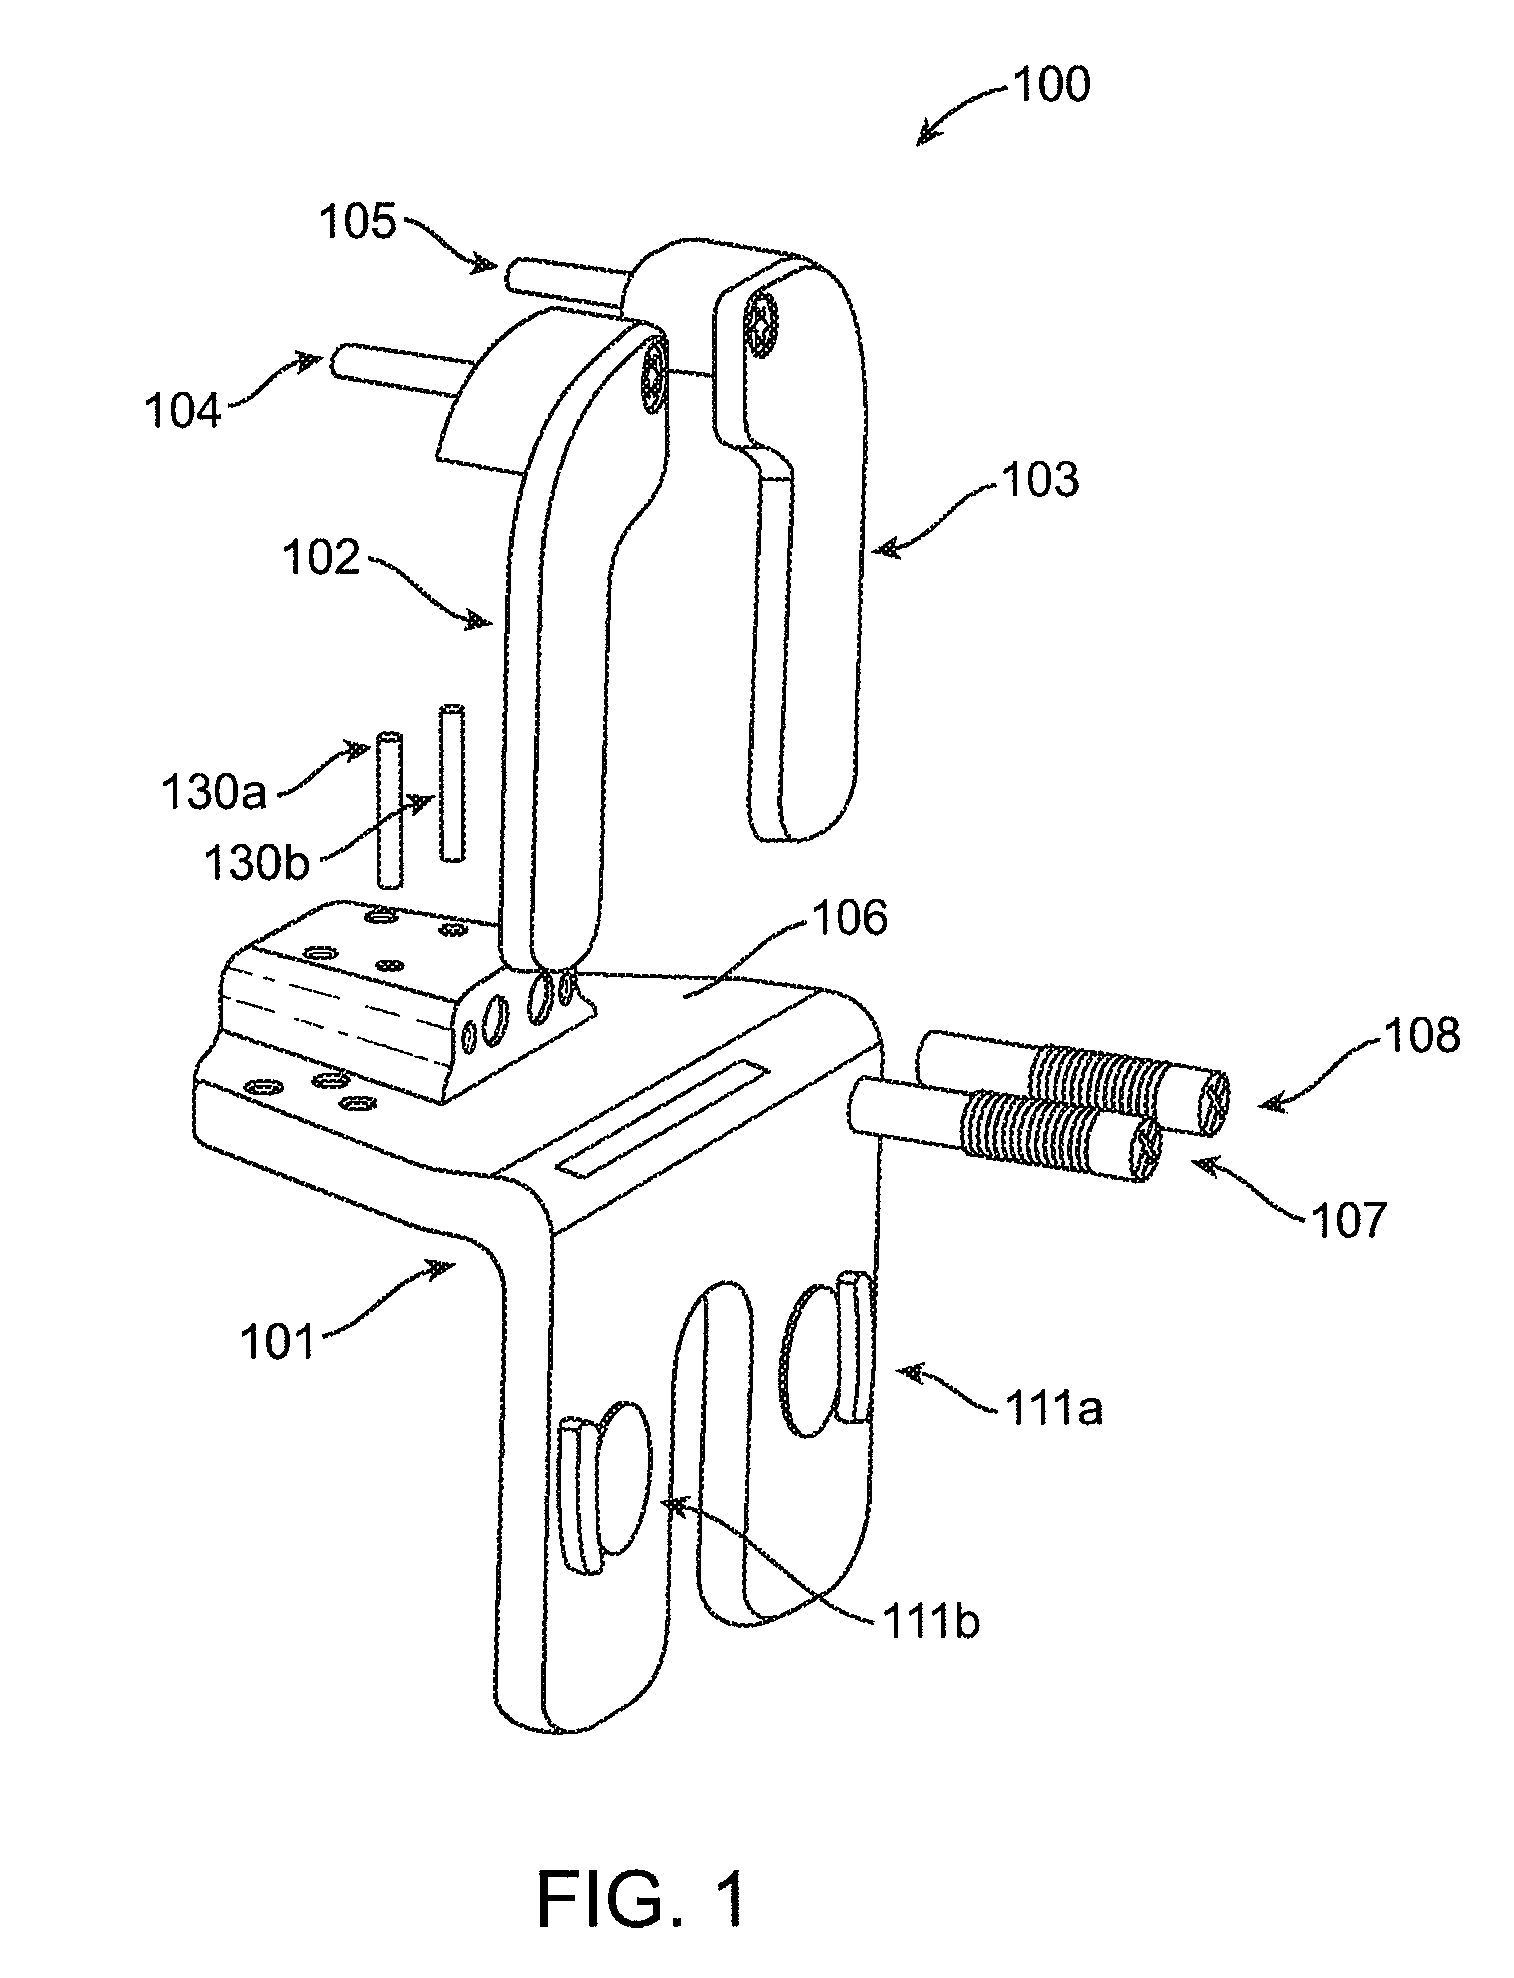 System for positioning a cutting guide in knee surgery